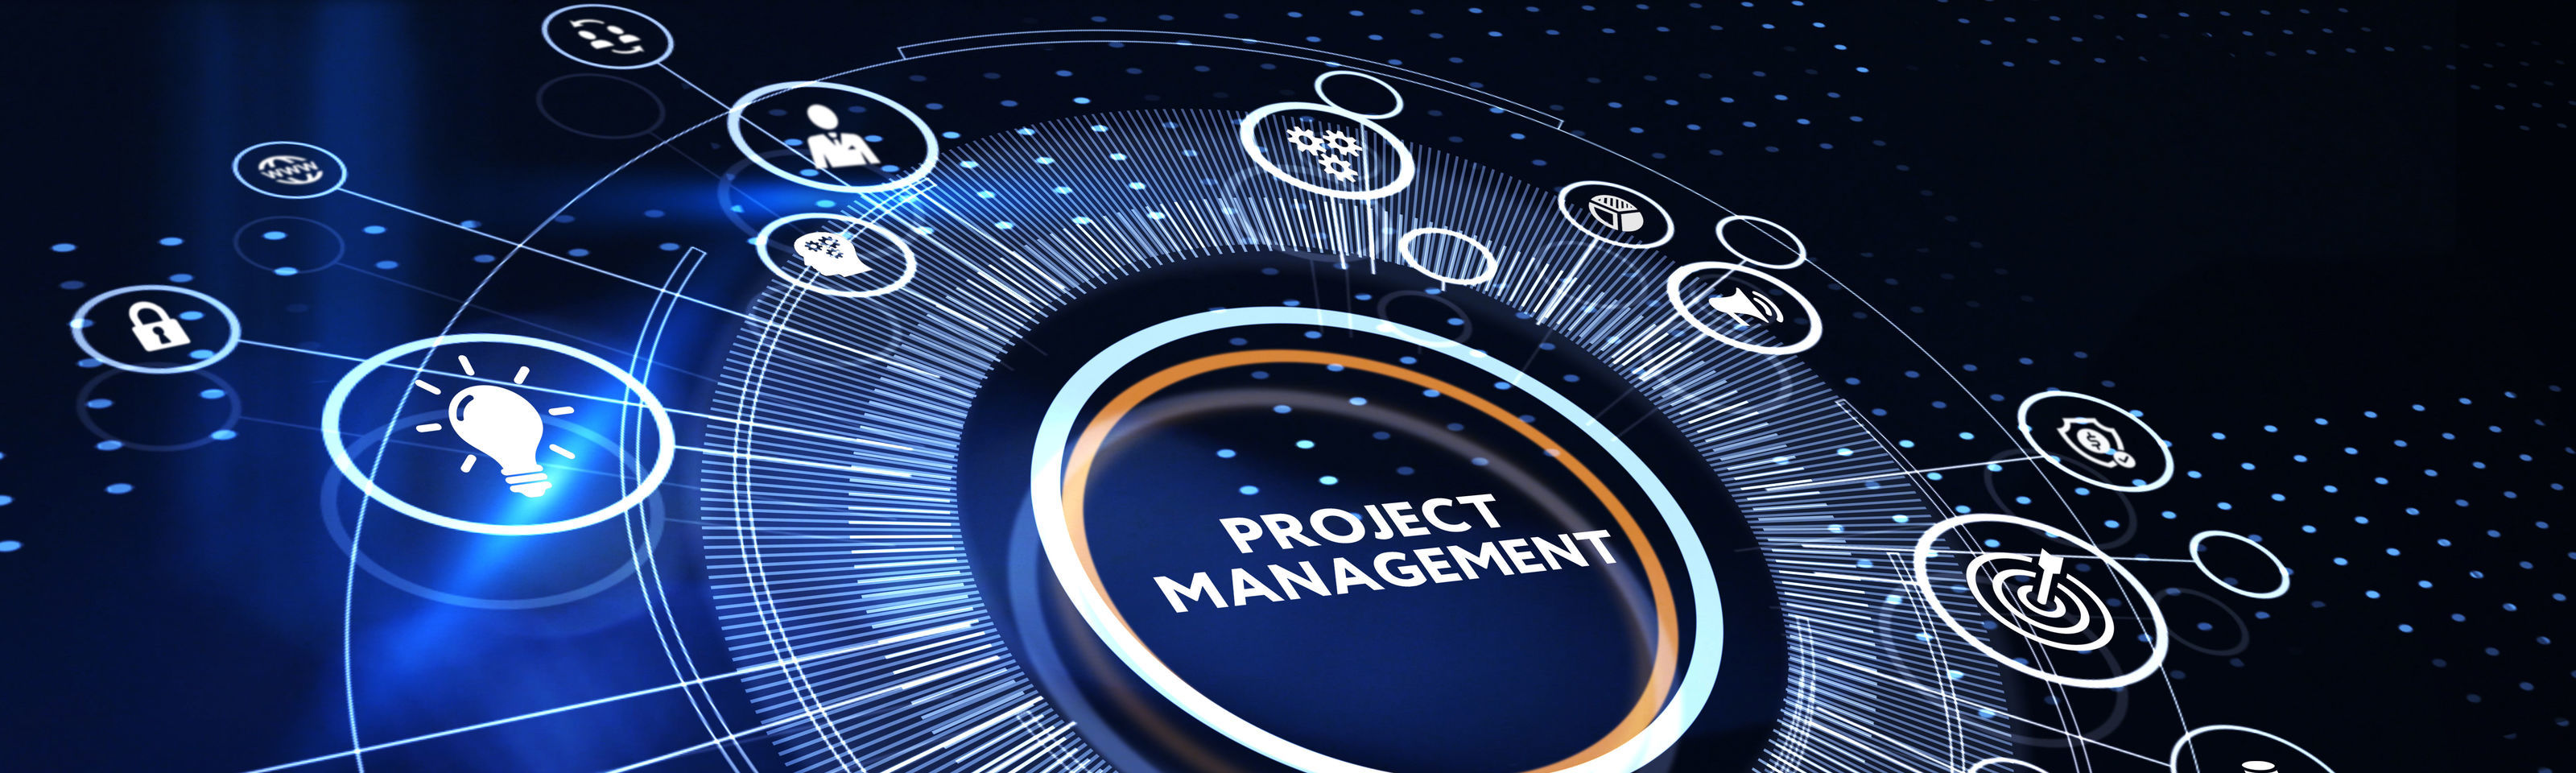 Embracing Good BIM Project Management: A Guide to Following ISO 19650